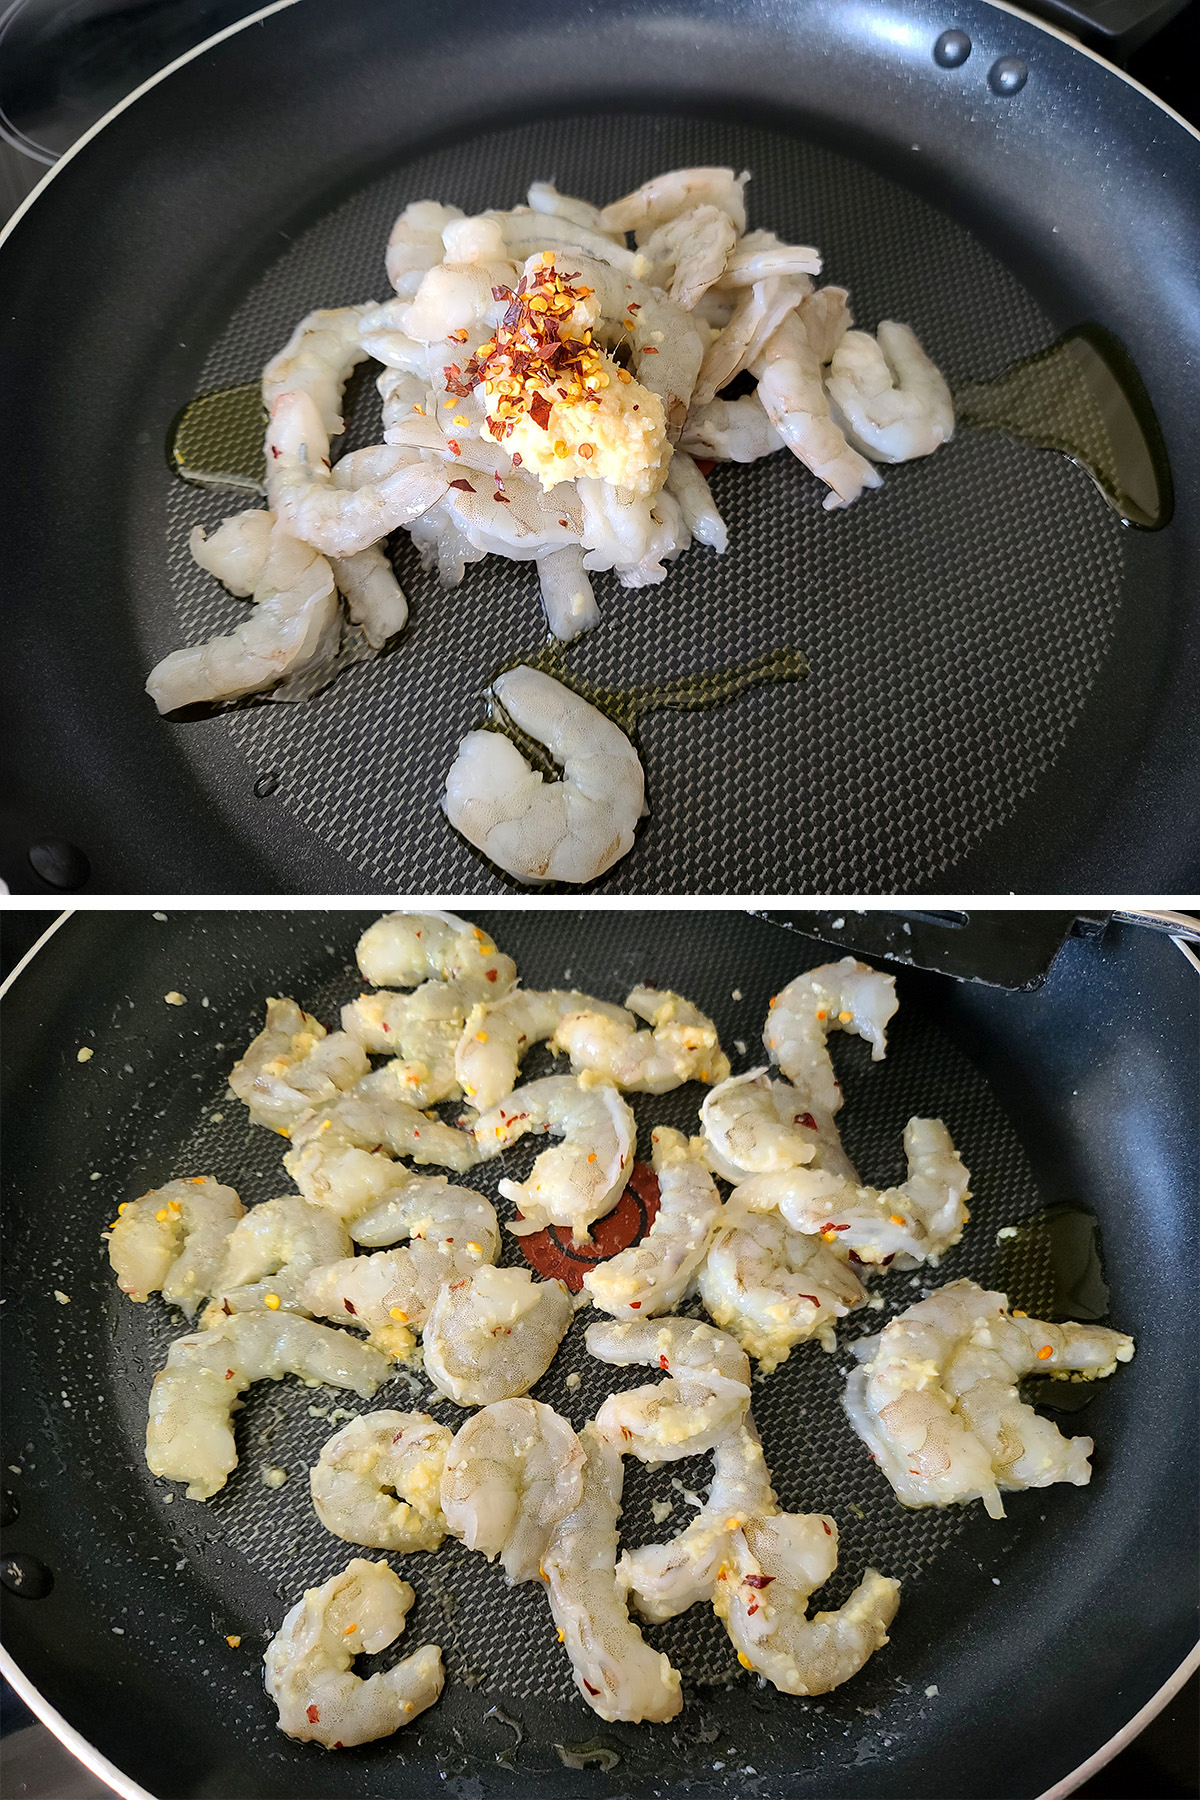 Shrimp cooking in a pan.